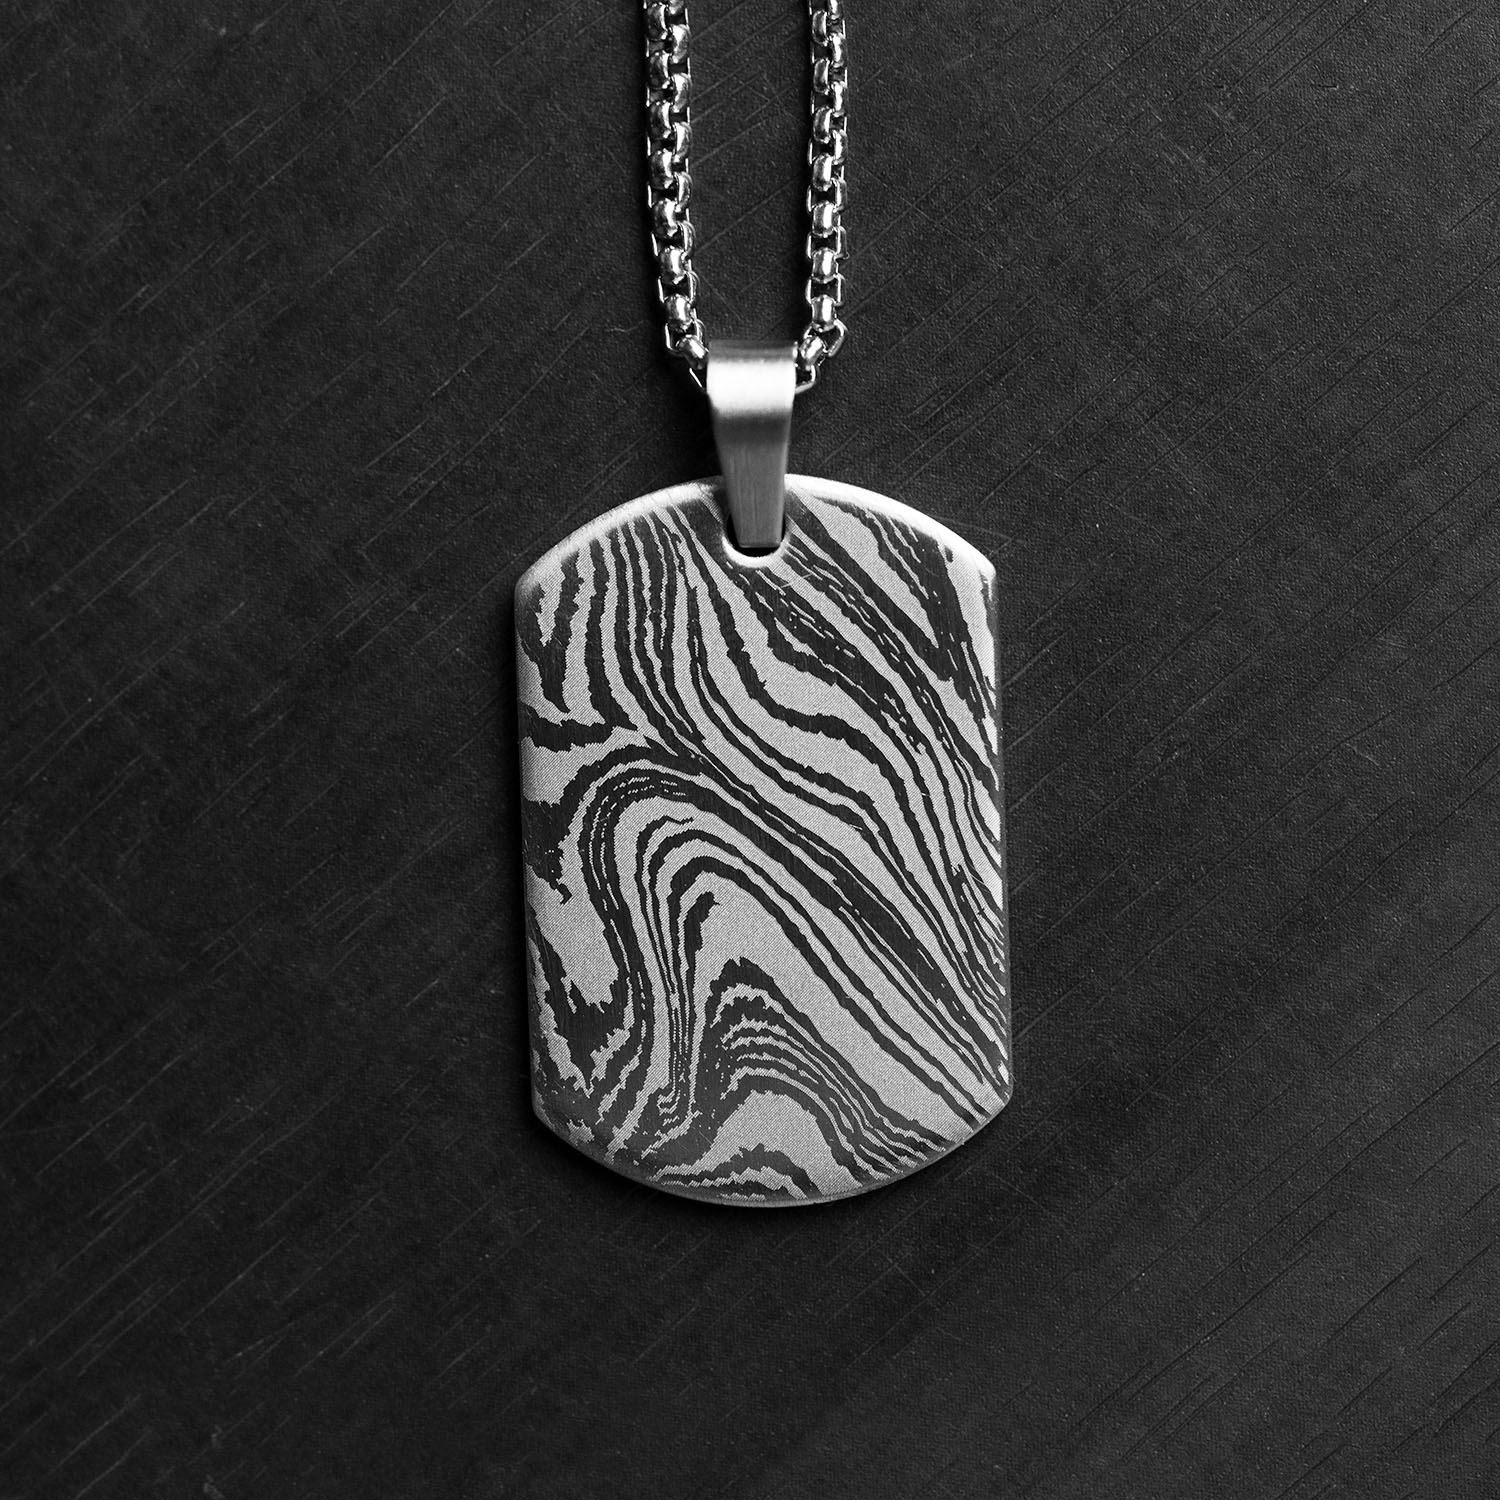 Damascus Steel Army Dog Tag Necklace Silver